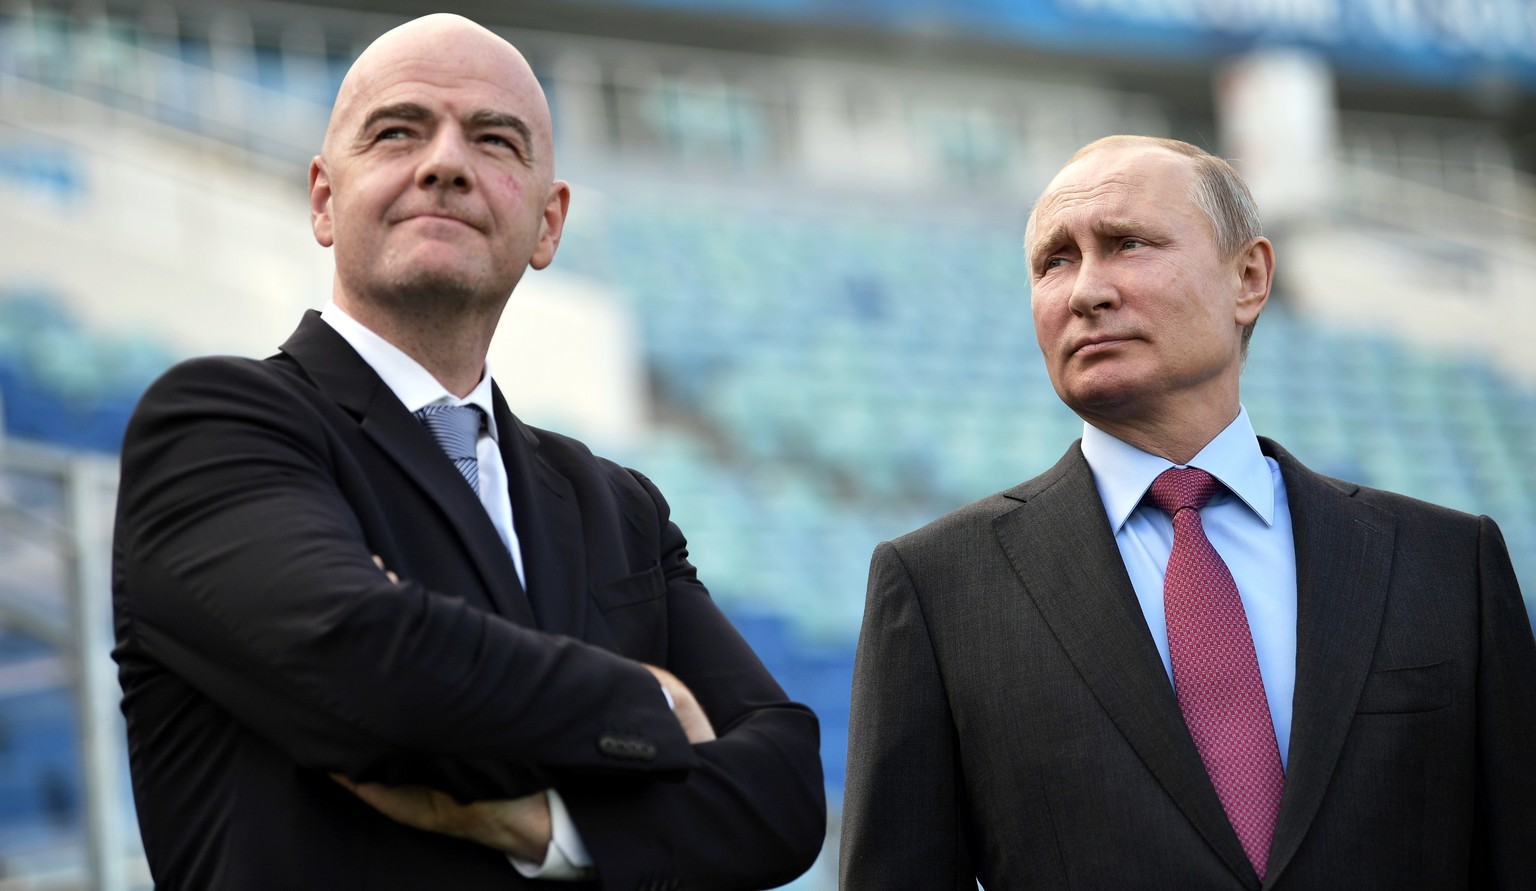 CAPTION CORRECTS THE NAME OF RESORT FROM SLOVYANSK TO SOCHI Russian President Vladimir Putin, right, and FIFA president Gianni Infantino visit the Fisht Stadium in the Black Sea resort of Sochi, Russi ...